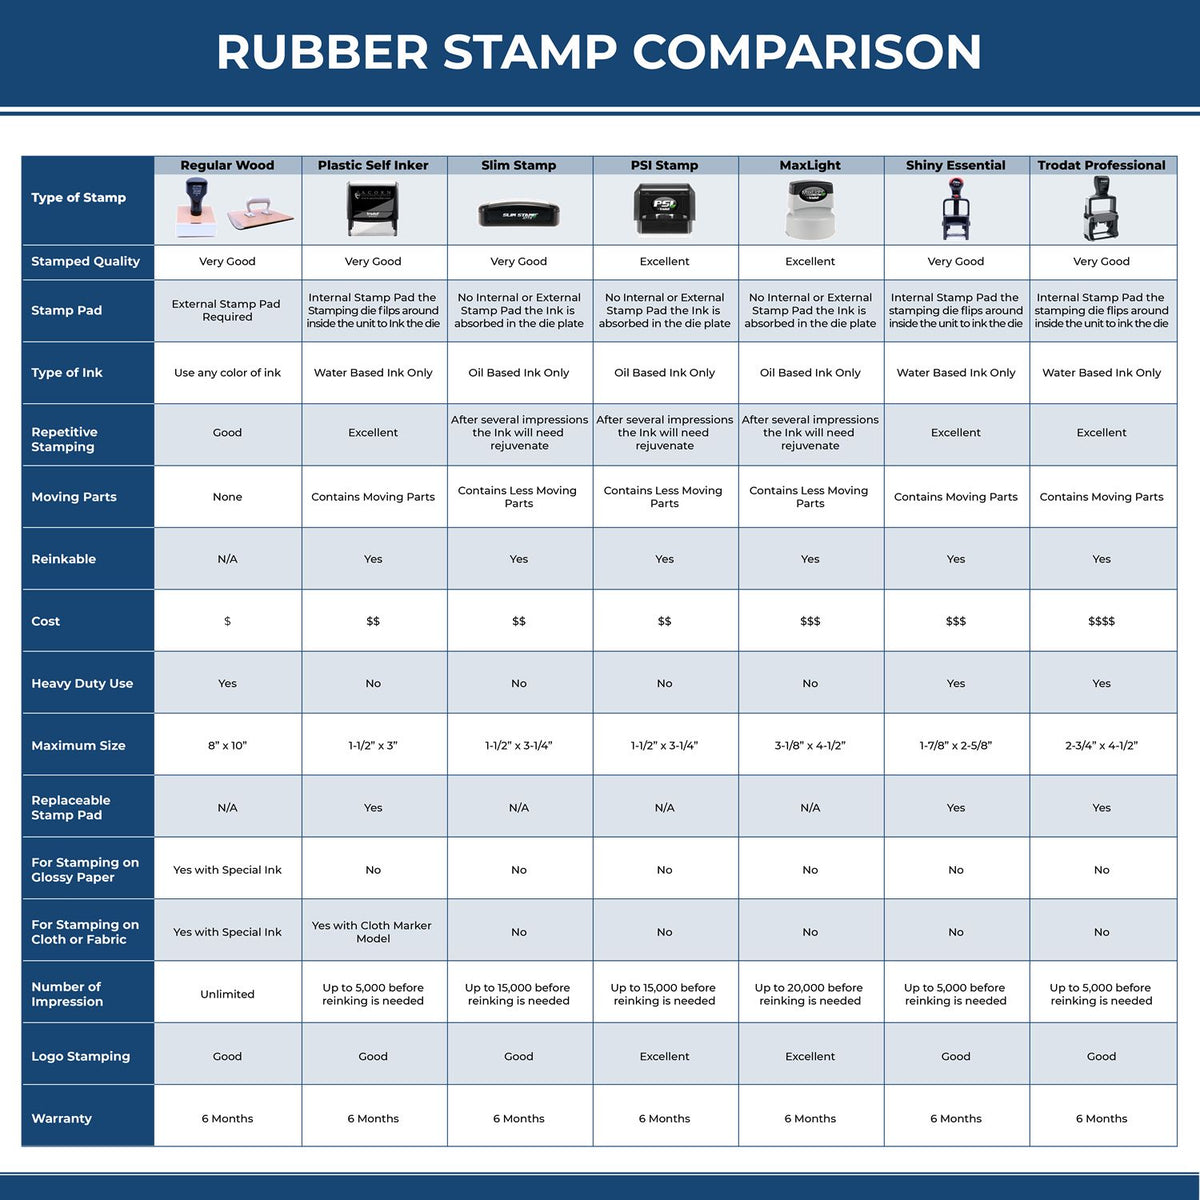 Large Self Inking Book Stamp 4638S Rubber Stamp Comparison